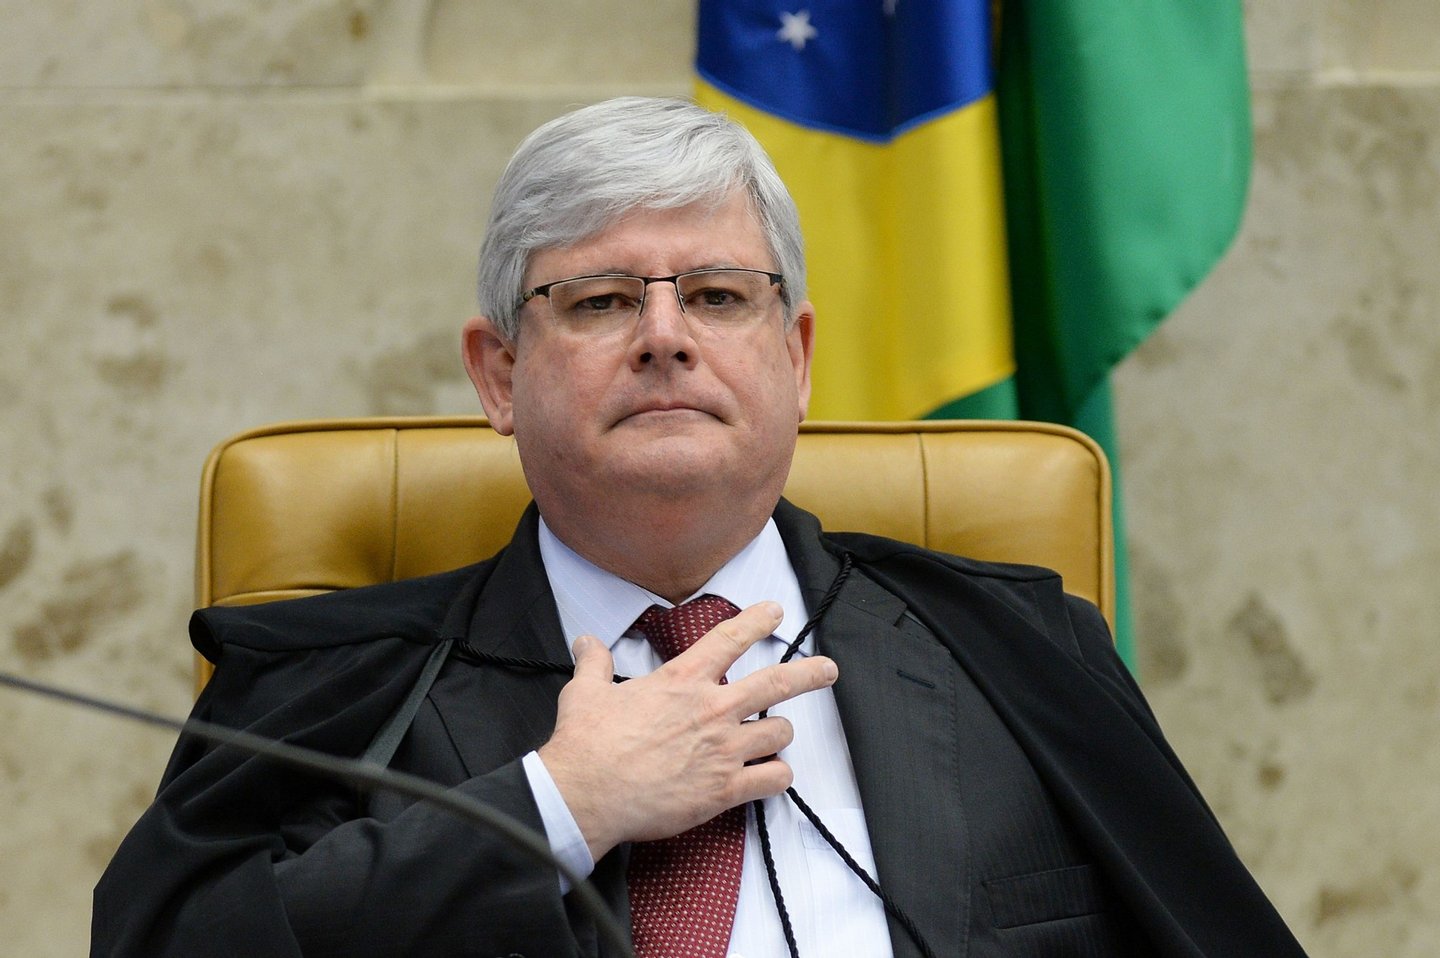 Brazil's Attorney General Rodrigo Janot, during a session of the Federal Supreme Court (STF) in Brasilia on April 20, 2016. Brazil's Supreme Court on Wednesday postponed a decision on whether to authorize the controversial appointment of former leader Luiz Inacio Lula da Silva to the embattled government of his protegee, President Dilma Rousseff. / AFP / ANDRESSA ANHOLETE (Photo credit should read ANDRESSA ANHOLETE/AFP/Getty Images)